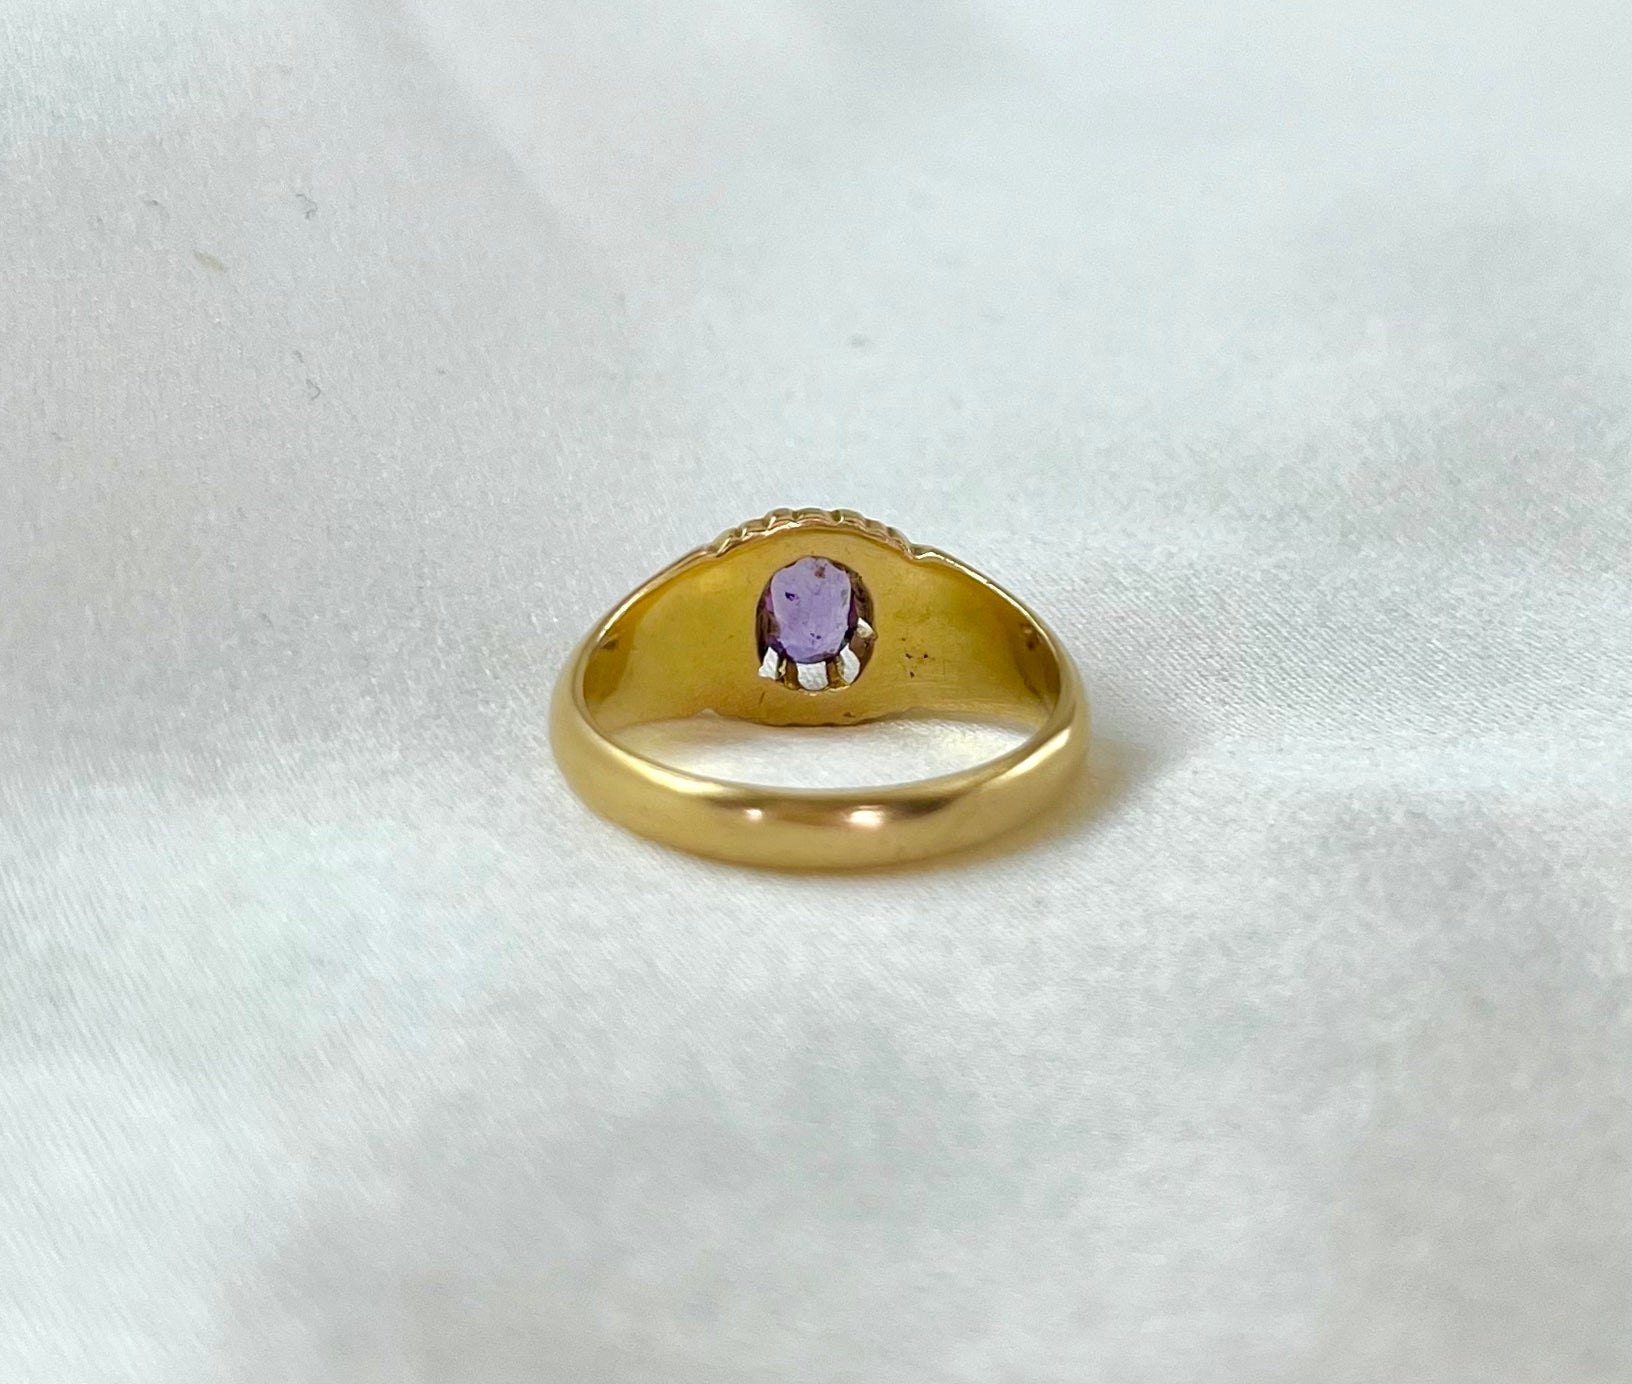 Antique Victorian 18ct Gold Buttercup Setting Amethyst Ring, Size O 1800s